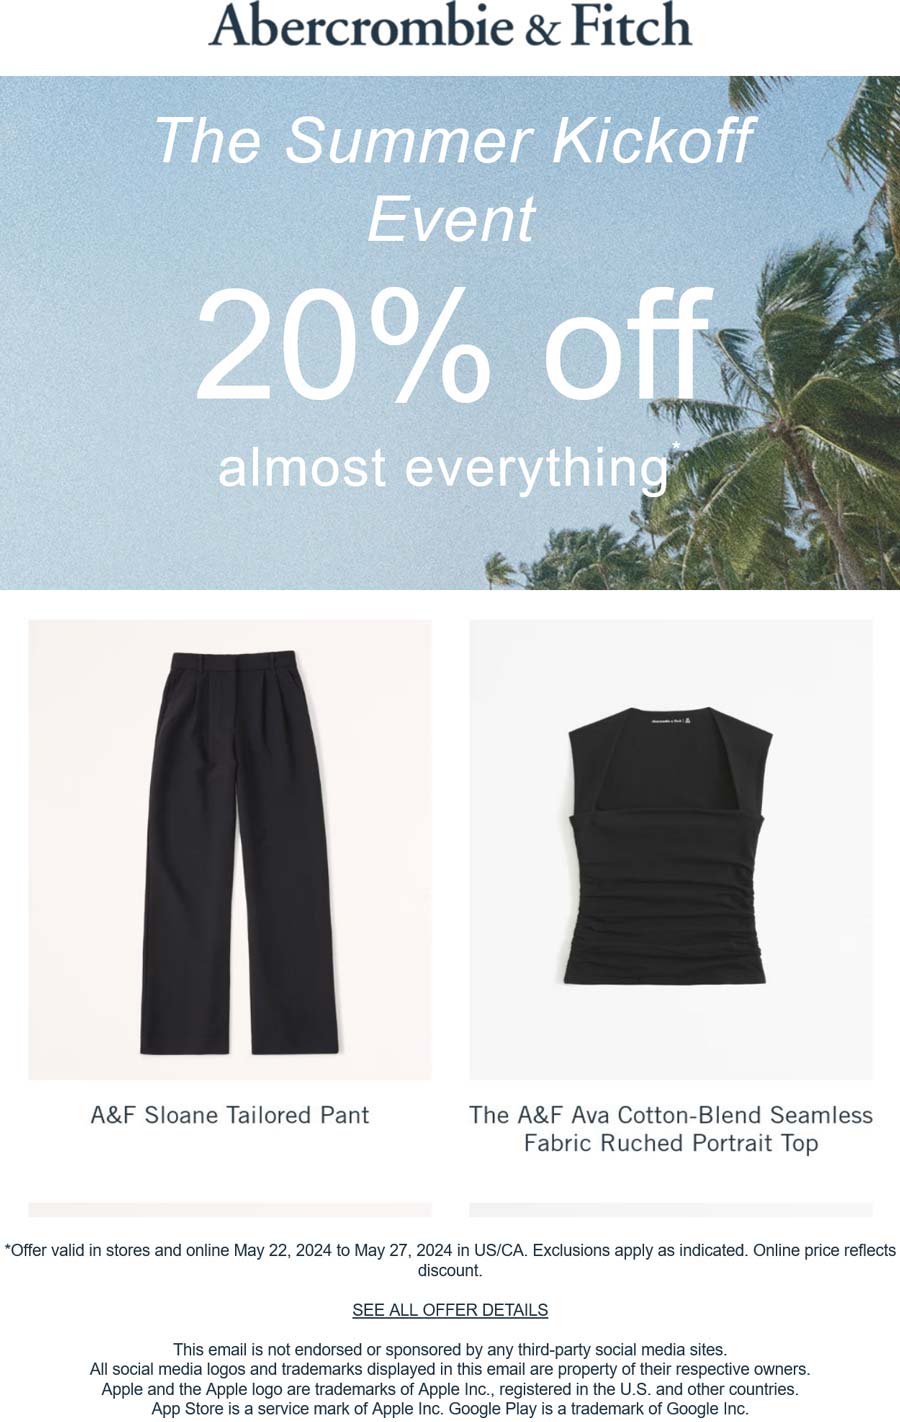 Abercrombie & Fitch stores Coupon  20% off at Abercrombie & Fitch #abercrombiefitch 